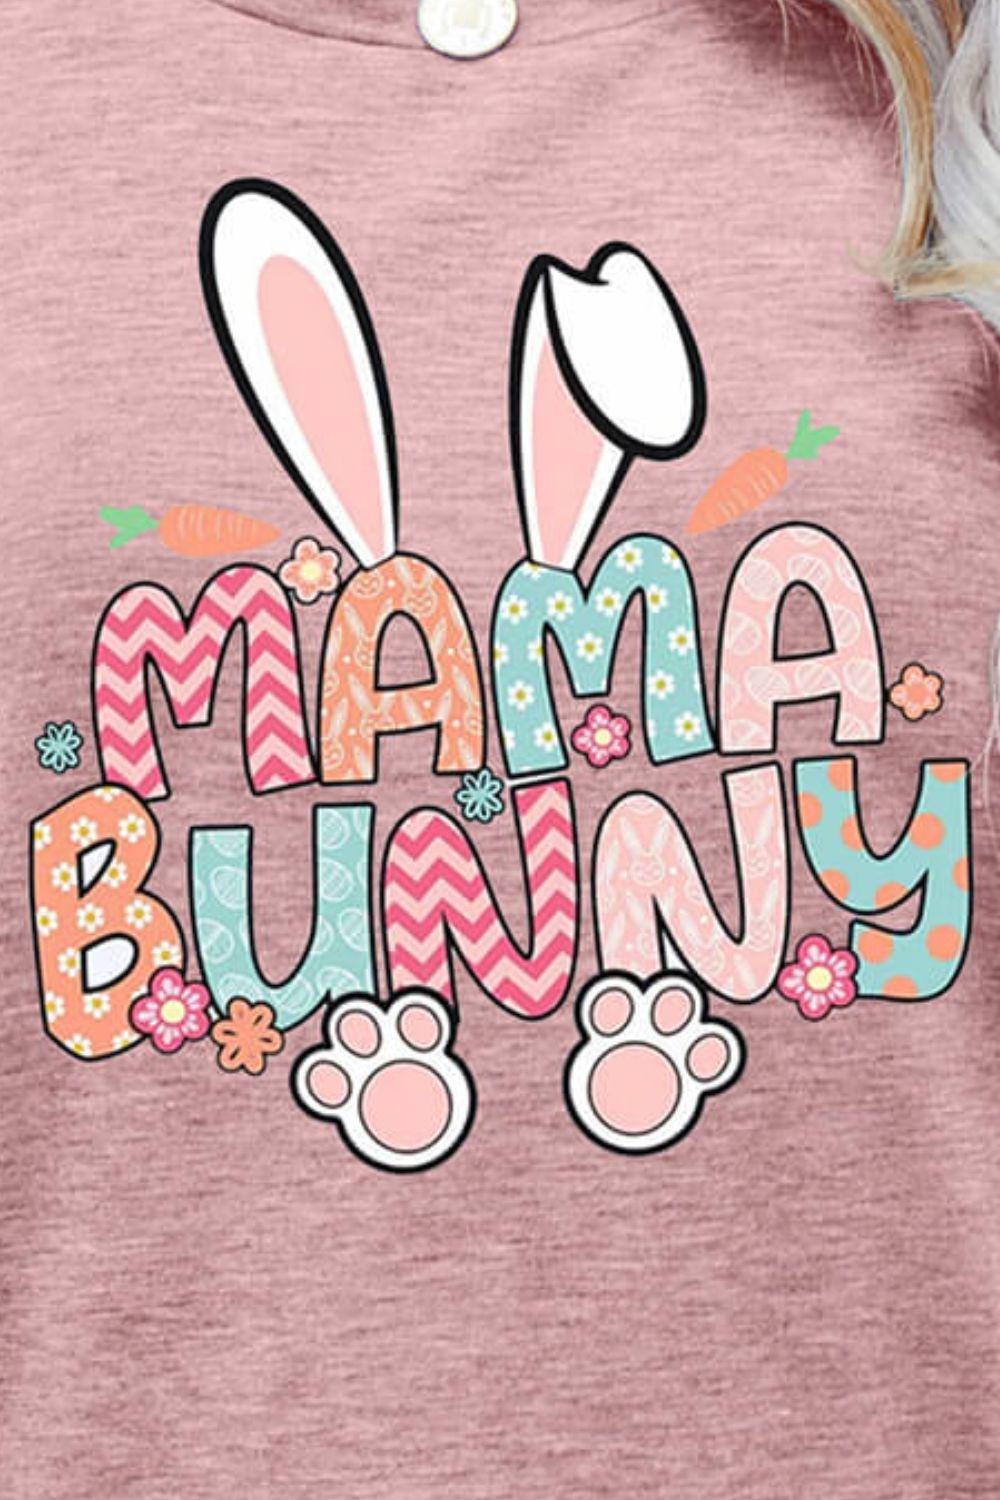 MAMA BUNNY Easter Graphic Short Sleeve Tee BLUE ZONE PLANET